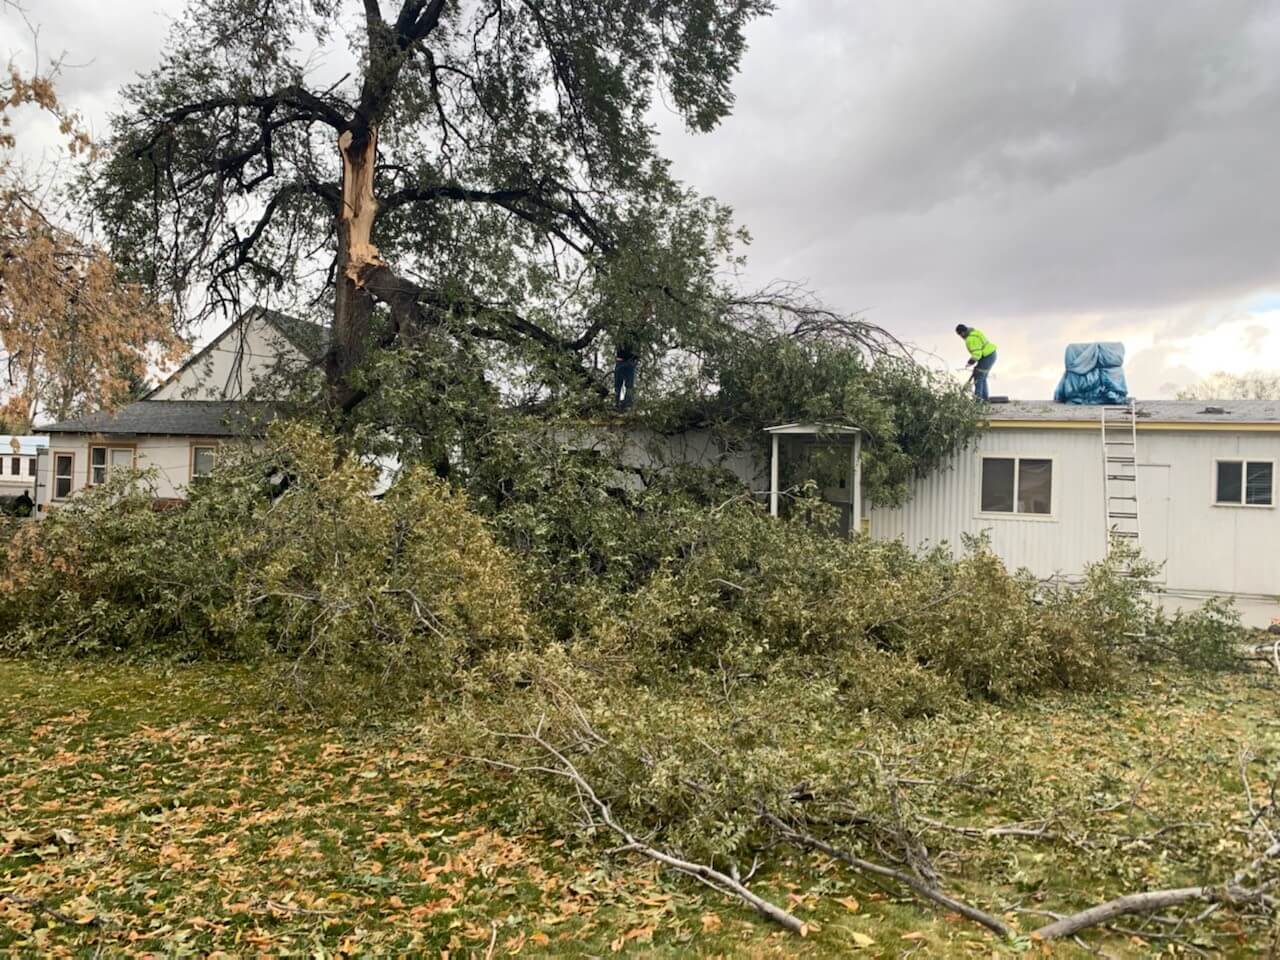 Tree felled on top of a house after a severe wind storm.